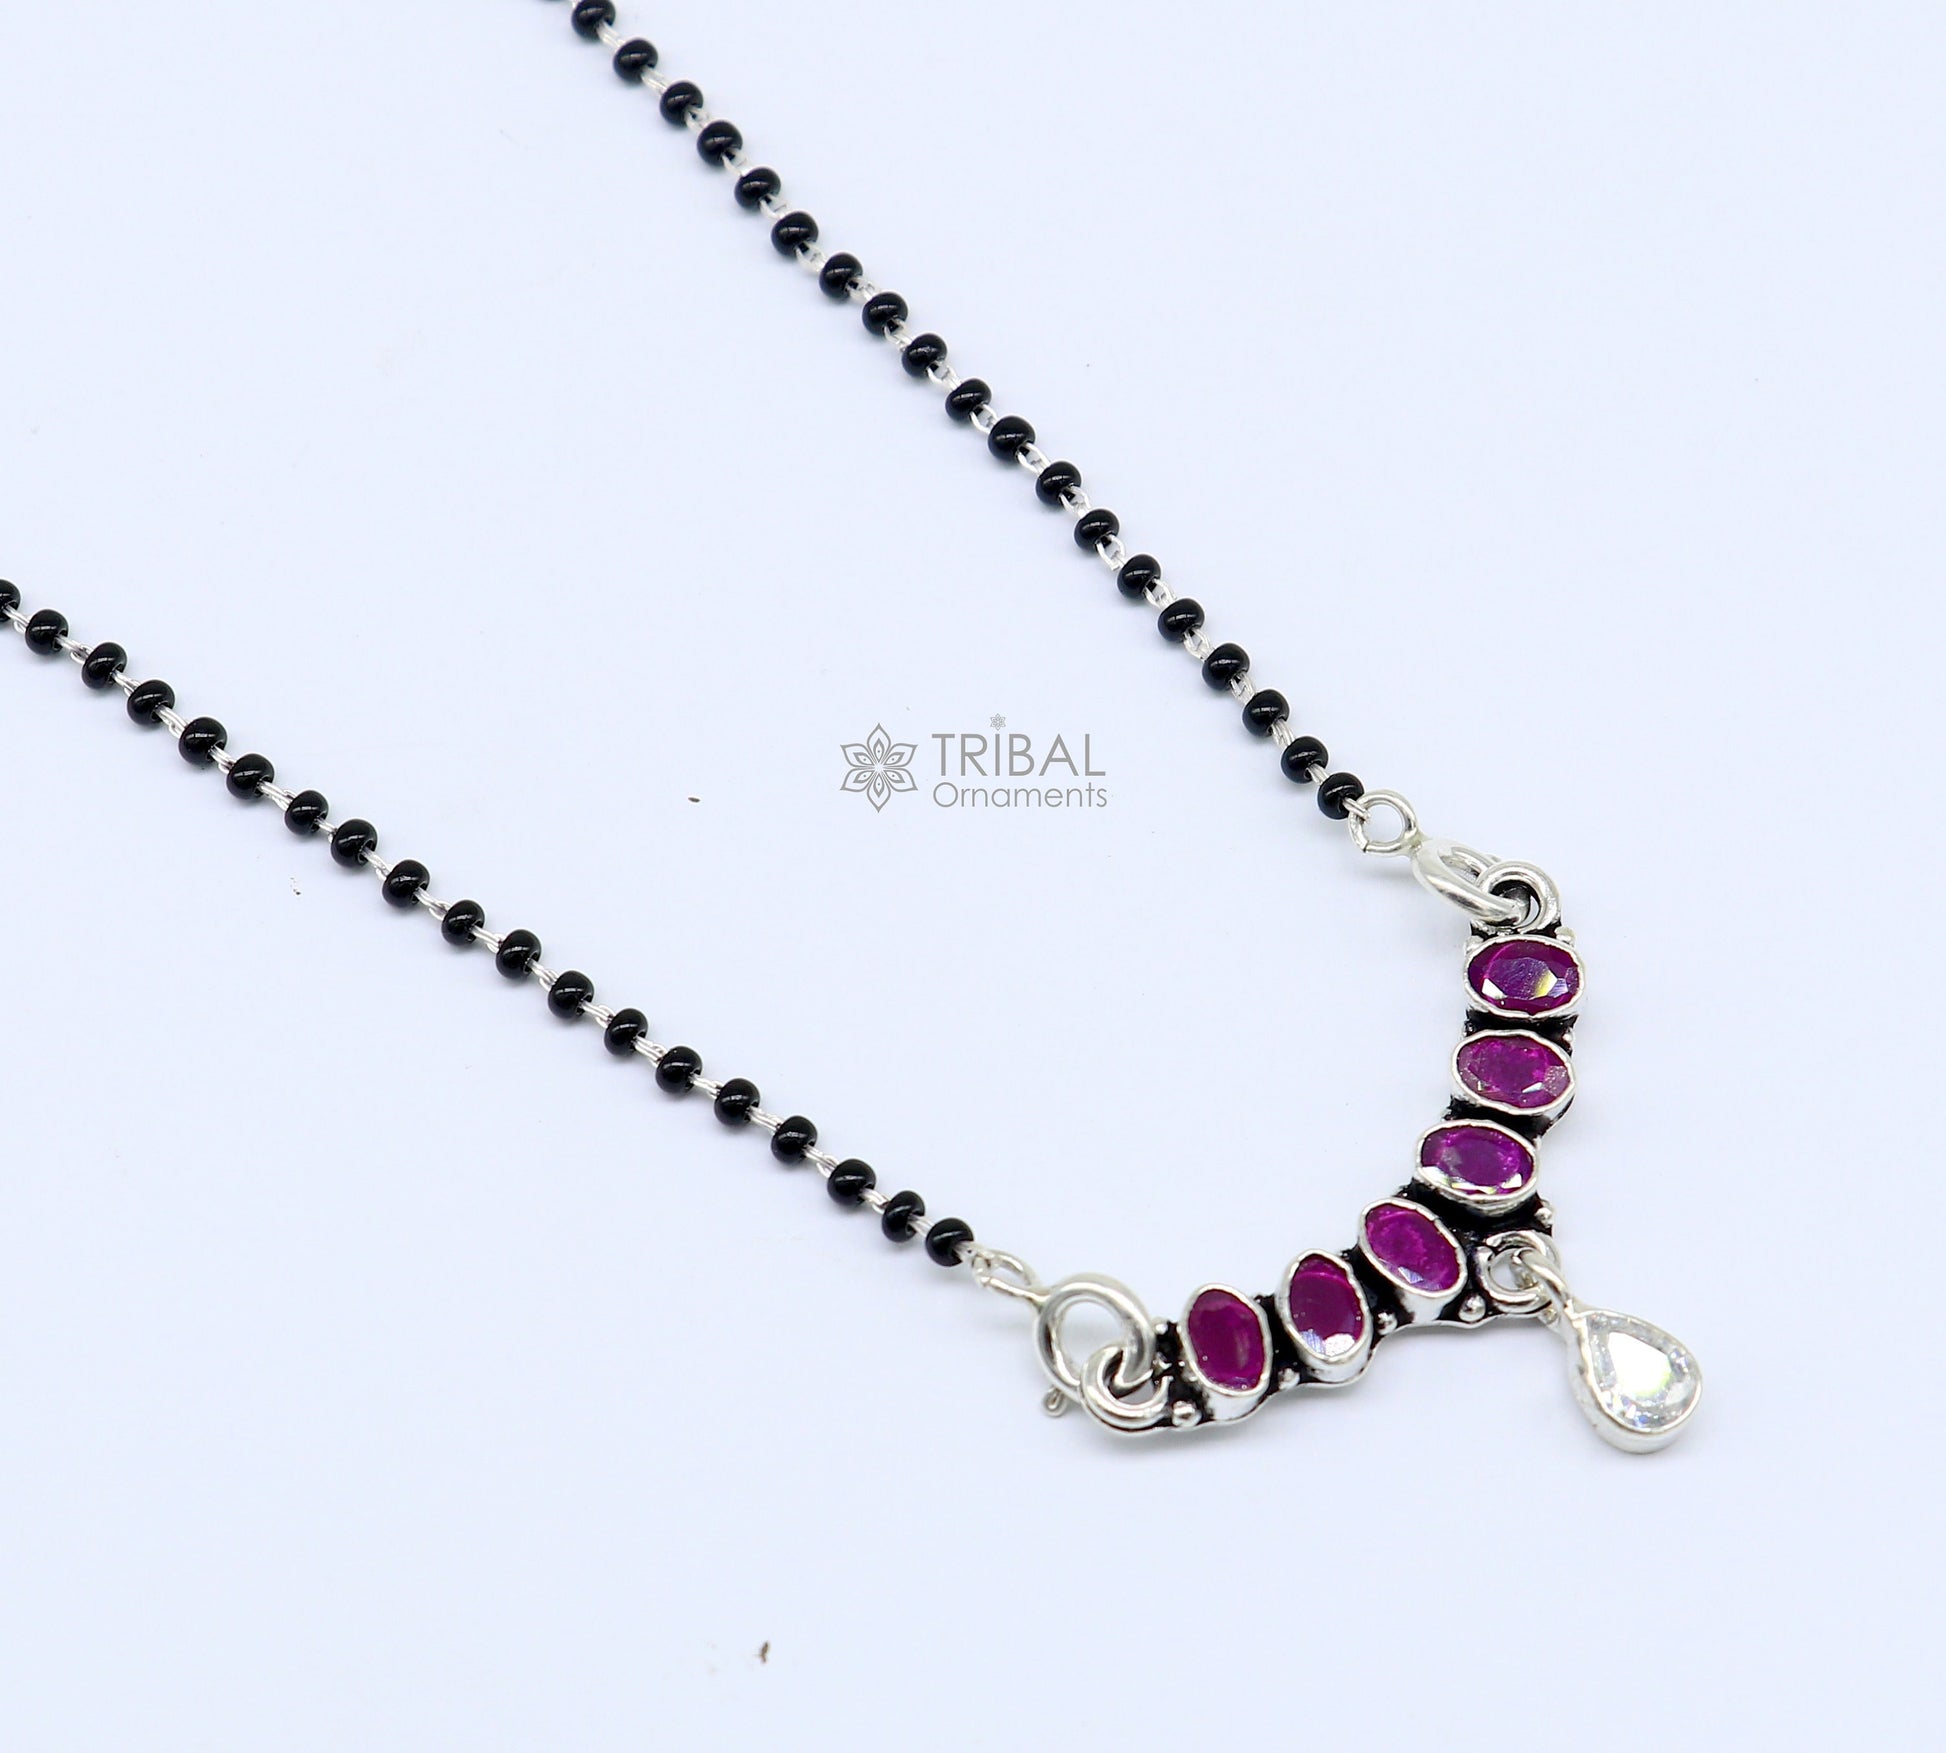 925 sterling silver black beads and red cut stone mangal sutra necklace for Every Occasion brides Mangalsutra chunky necklace ms47 - TRIBAL ORNAMENTS